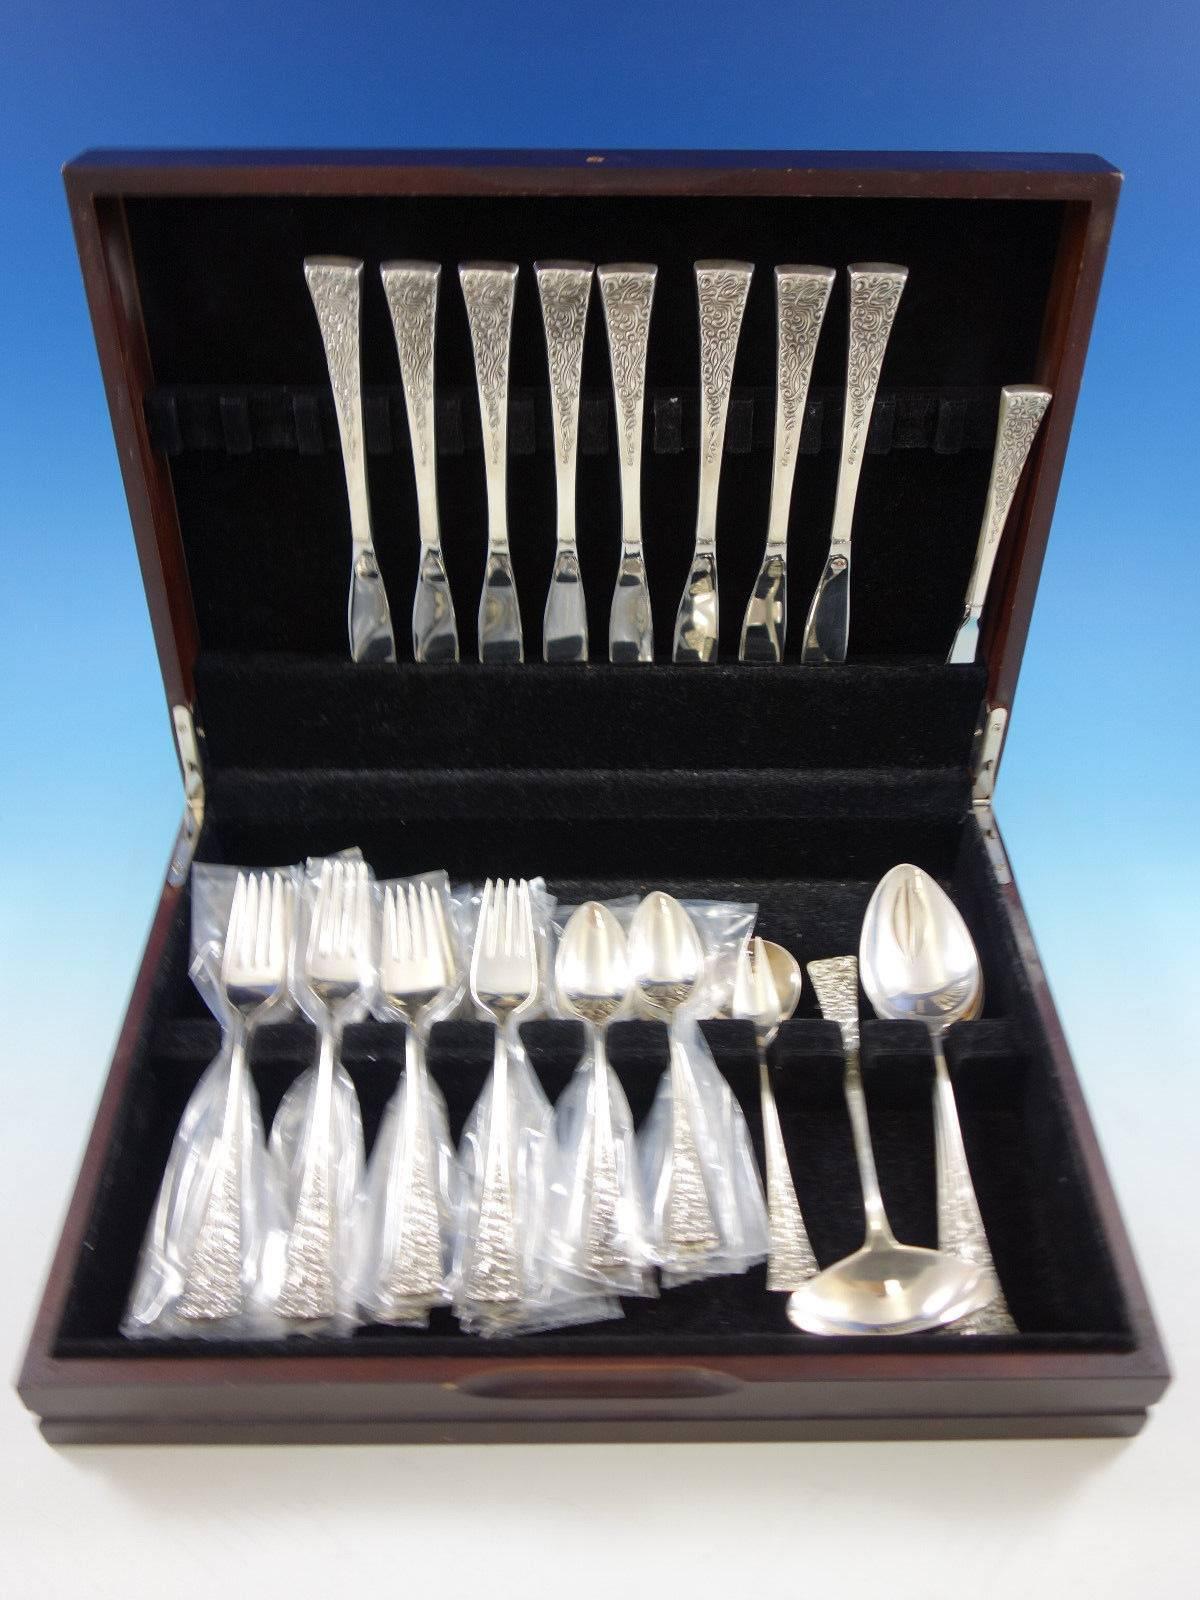 Modern tapestry by Reed and Barton designed by John Prip sterling silver flatware set, 39 pieces. This set includes: 

Eight knives, 9